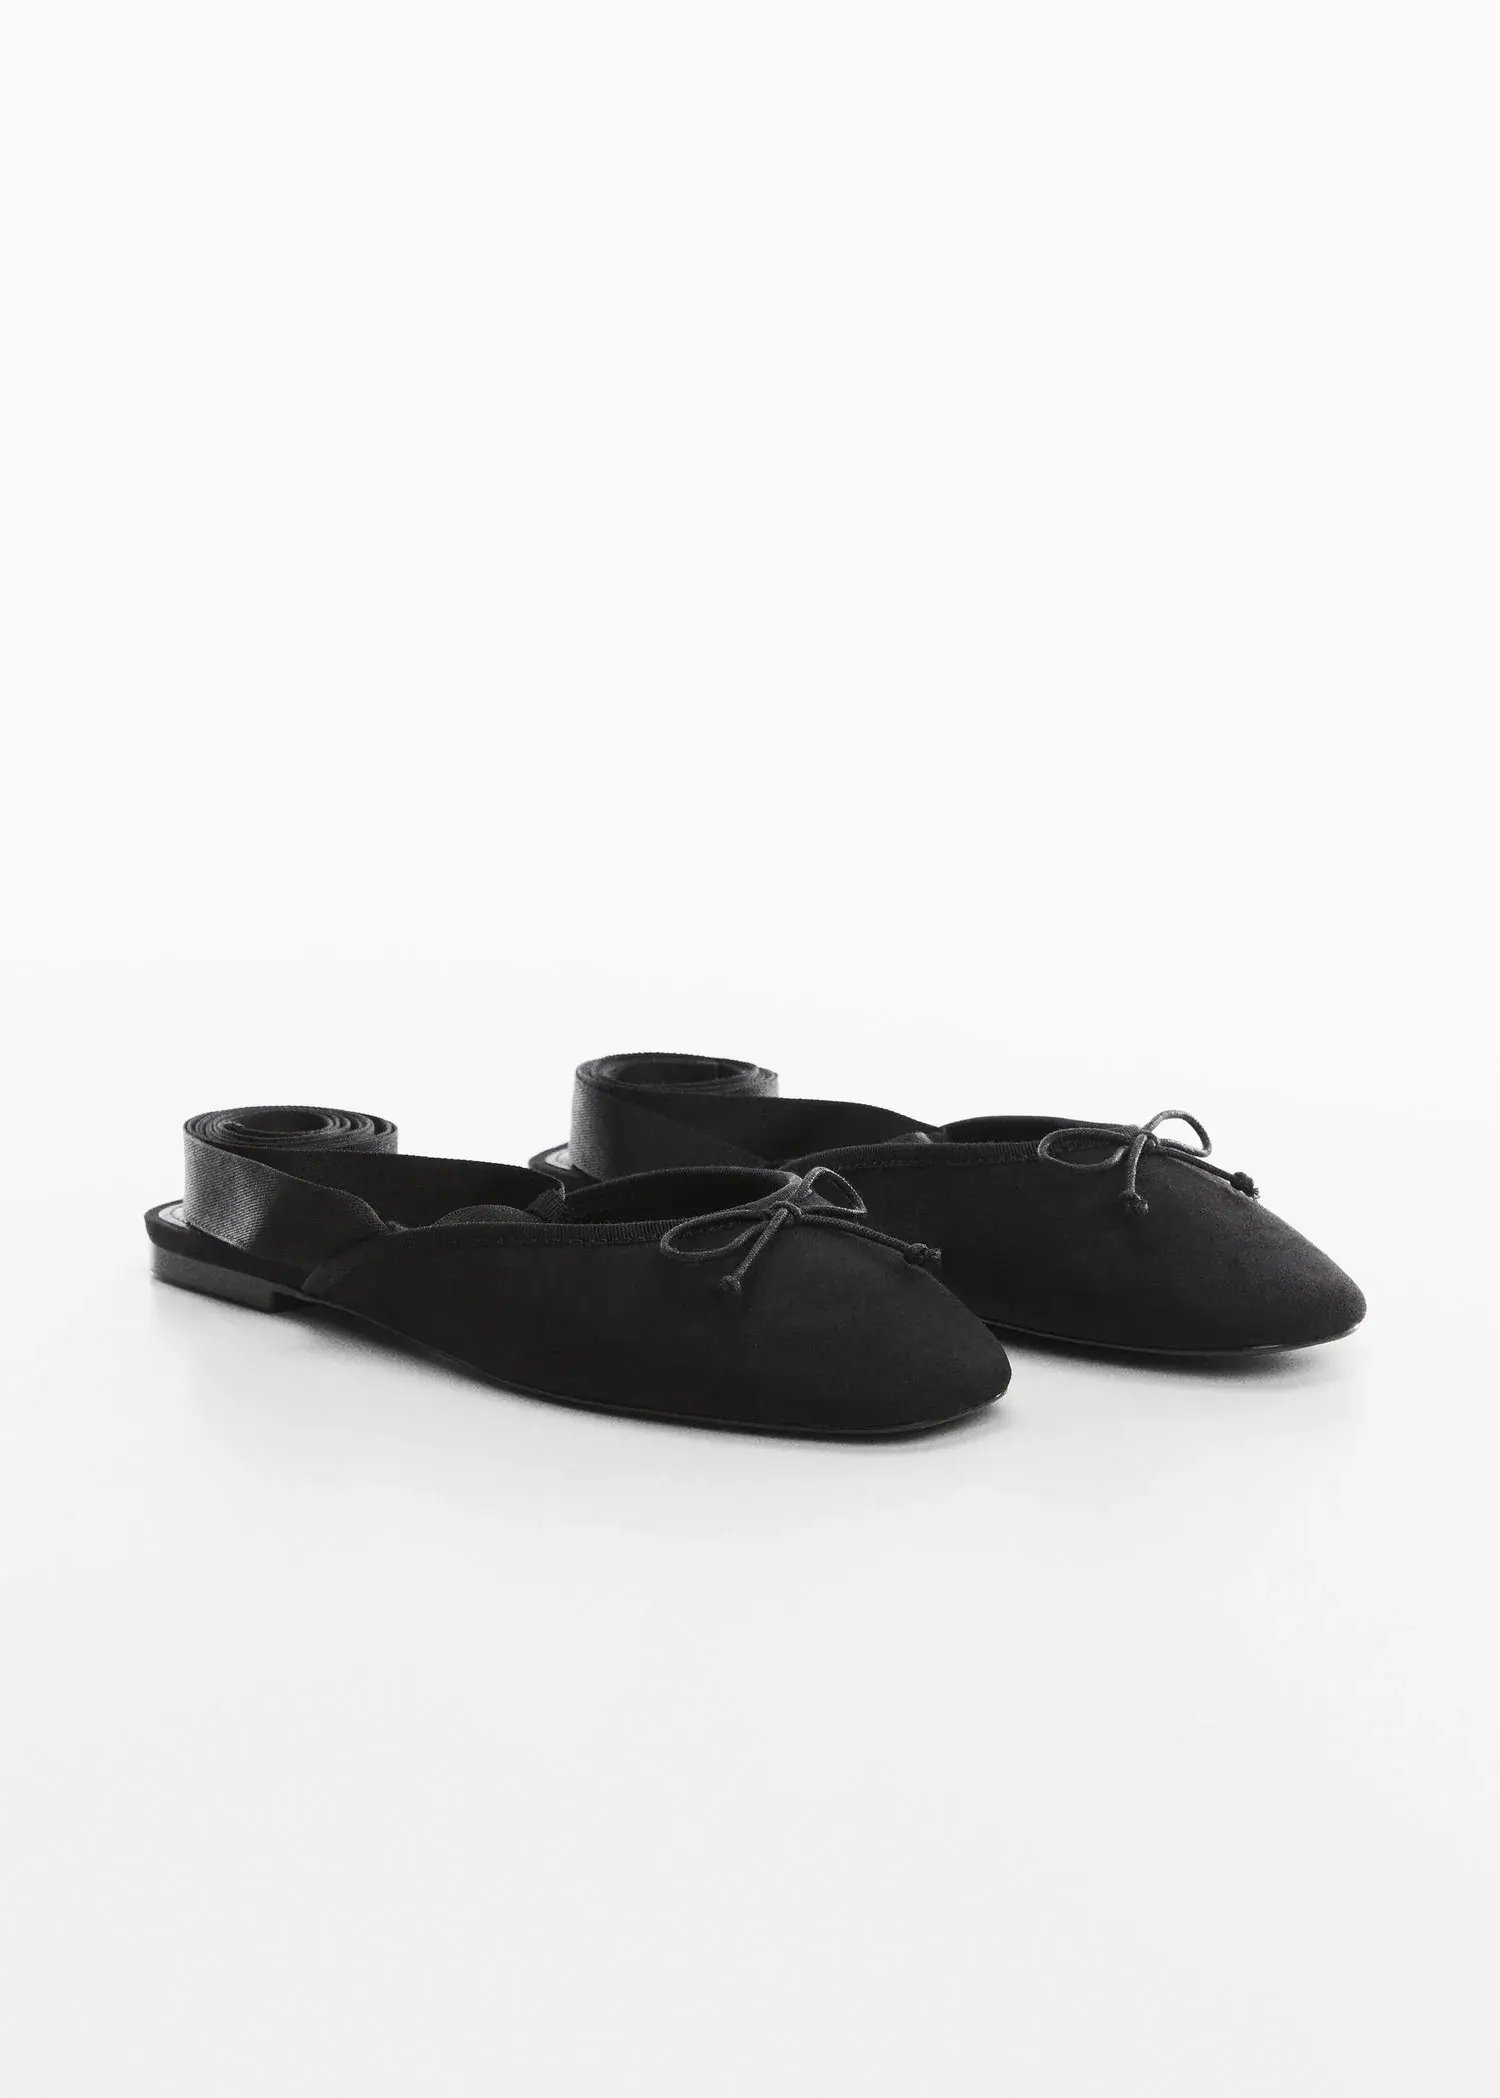 Mango Lace-up ballerinas. a pair of black ballet slippers on a white surface. 